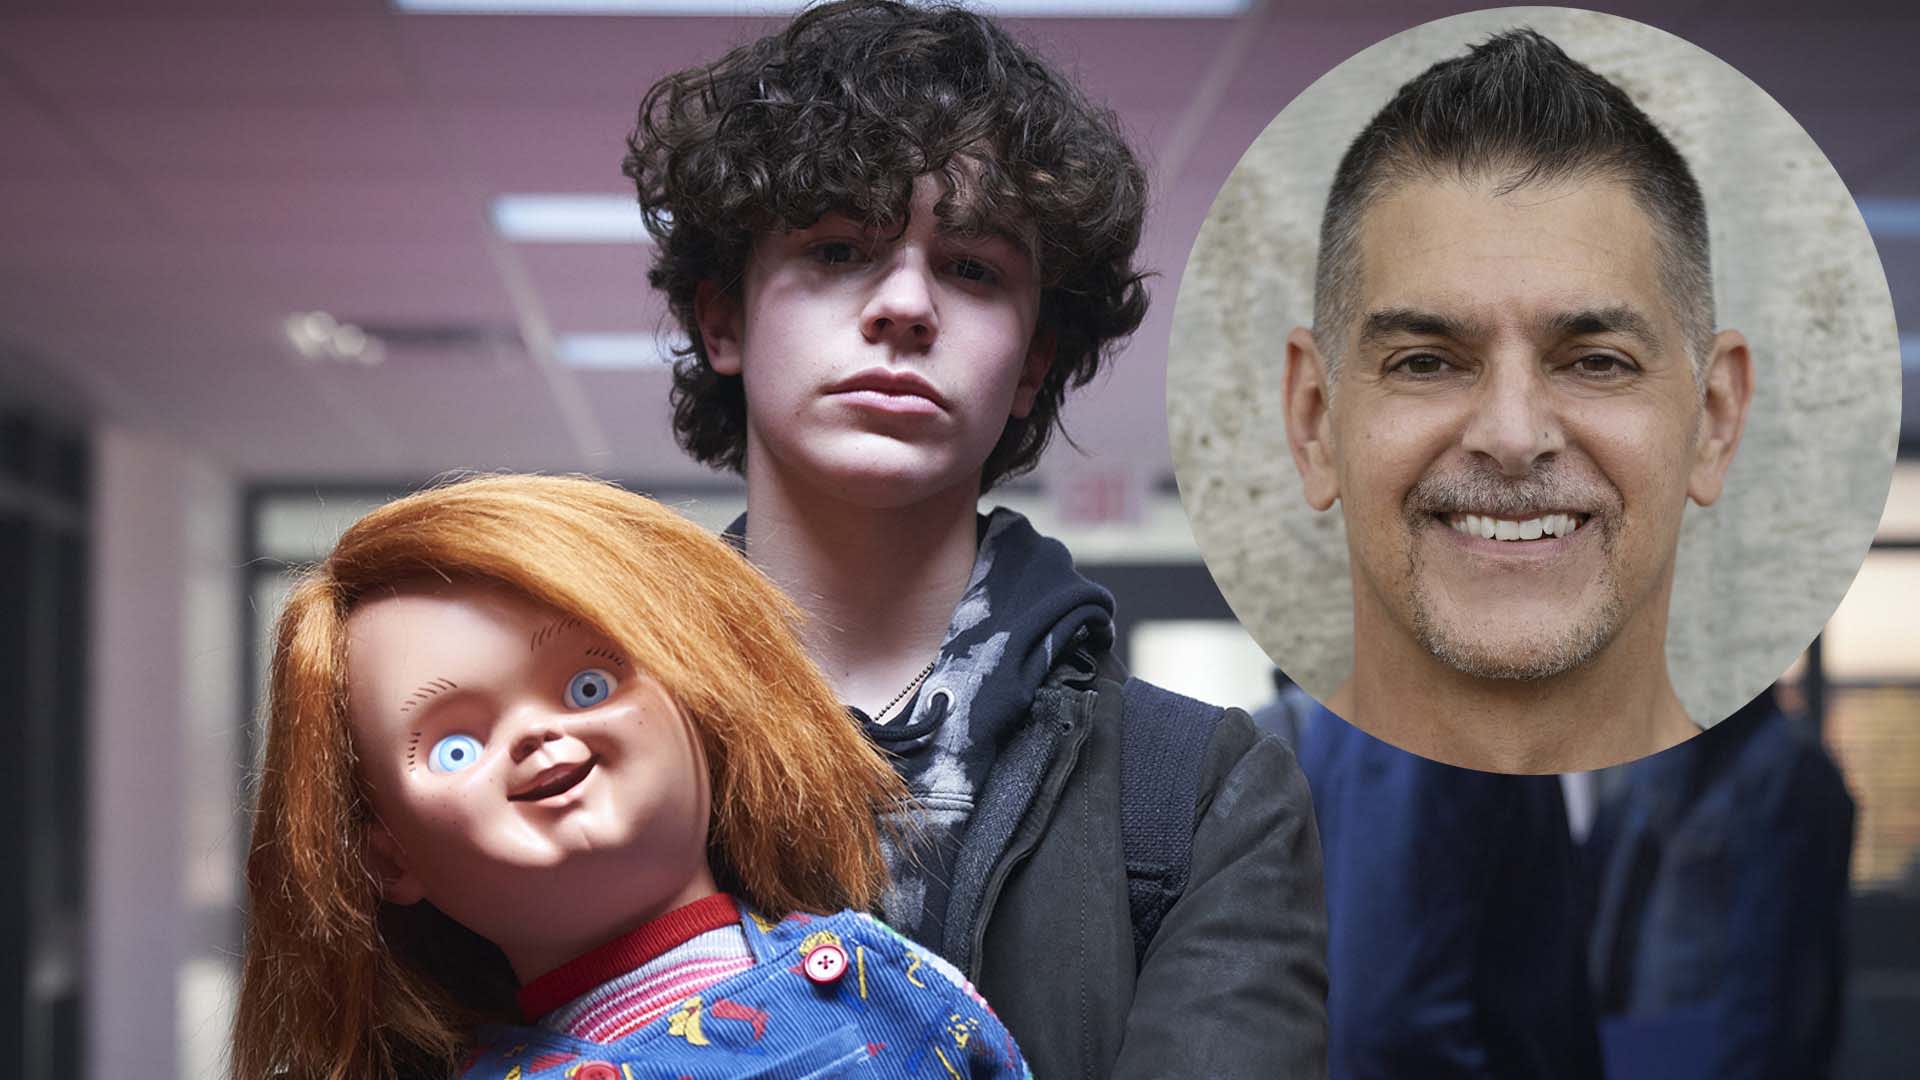 Chucky Creator Don Mancini Is A Skyscraper Fanatic, Would Love To Visit Marina Bay Sands